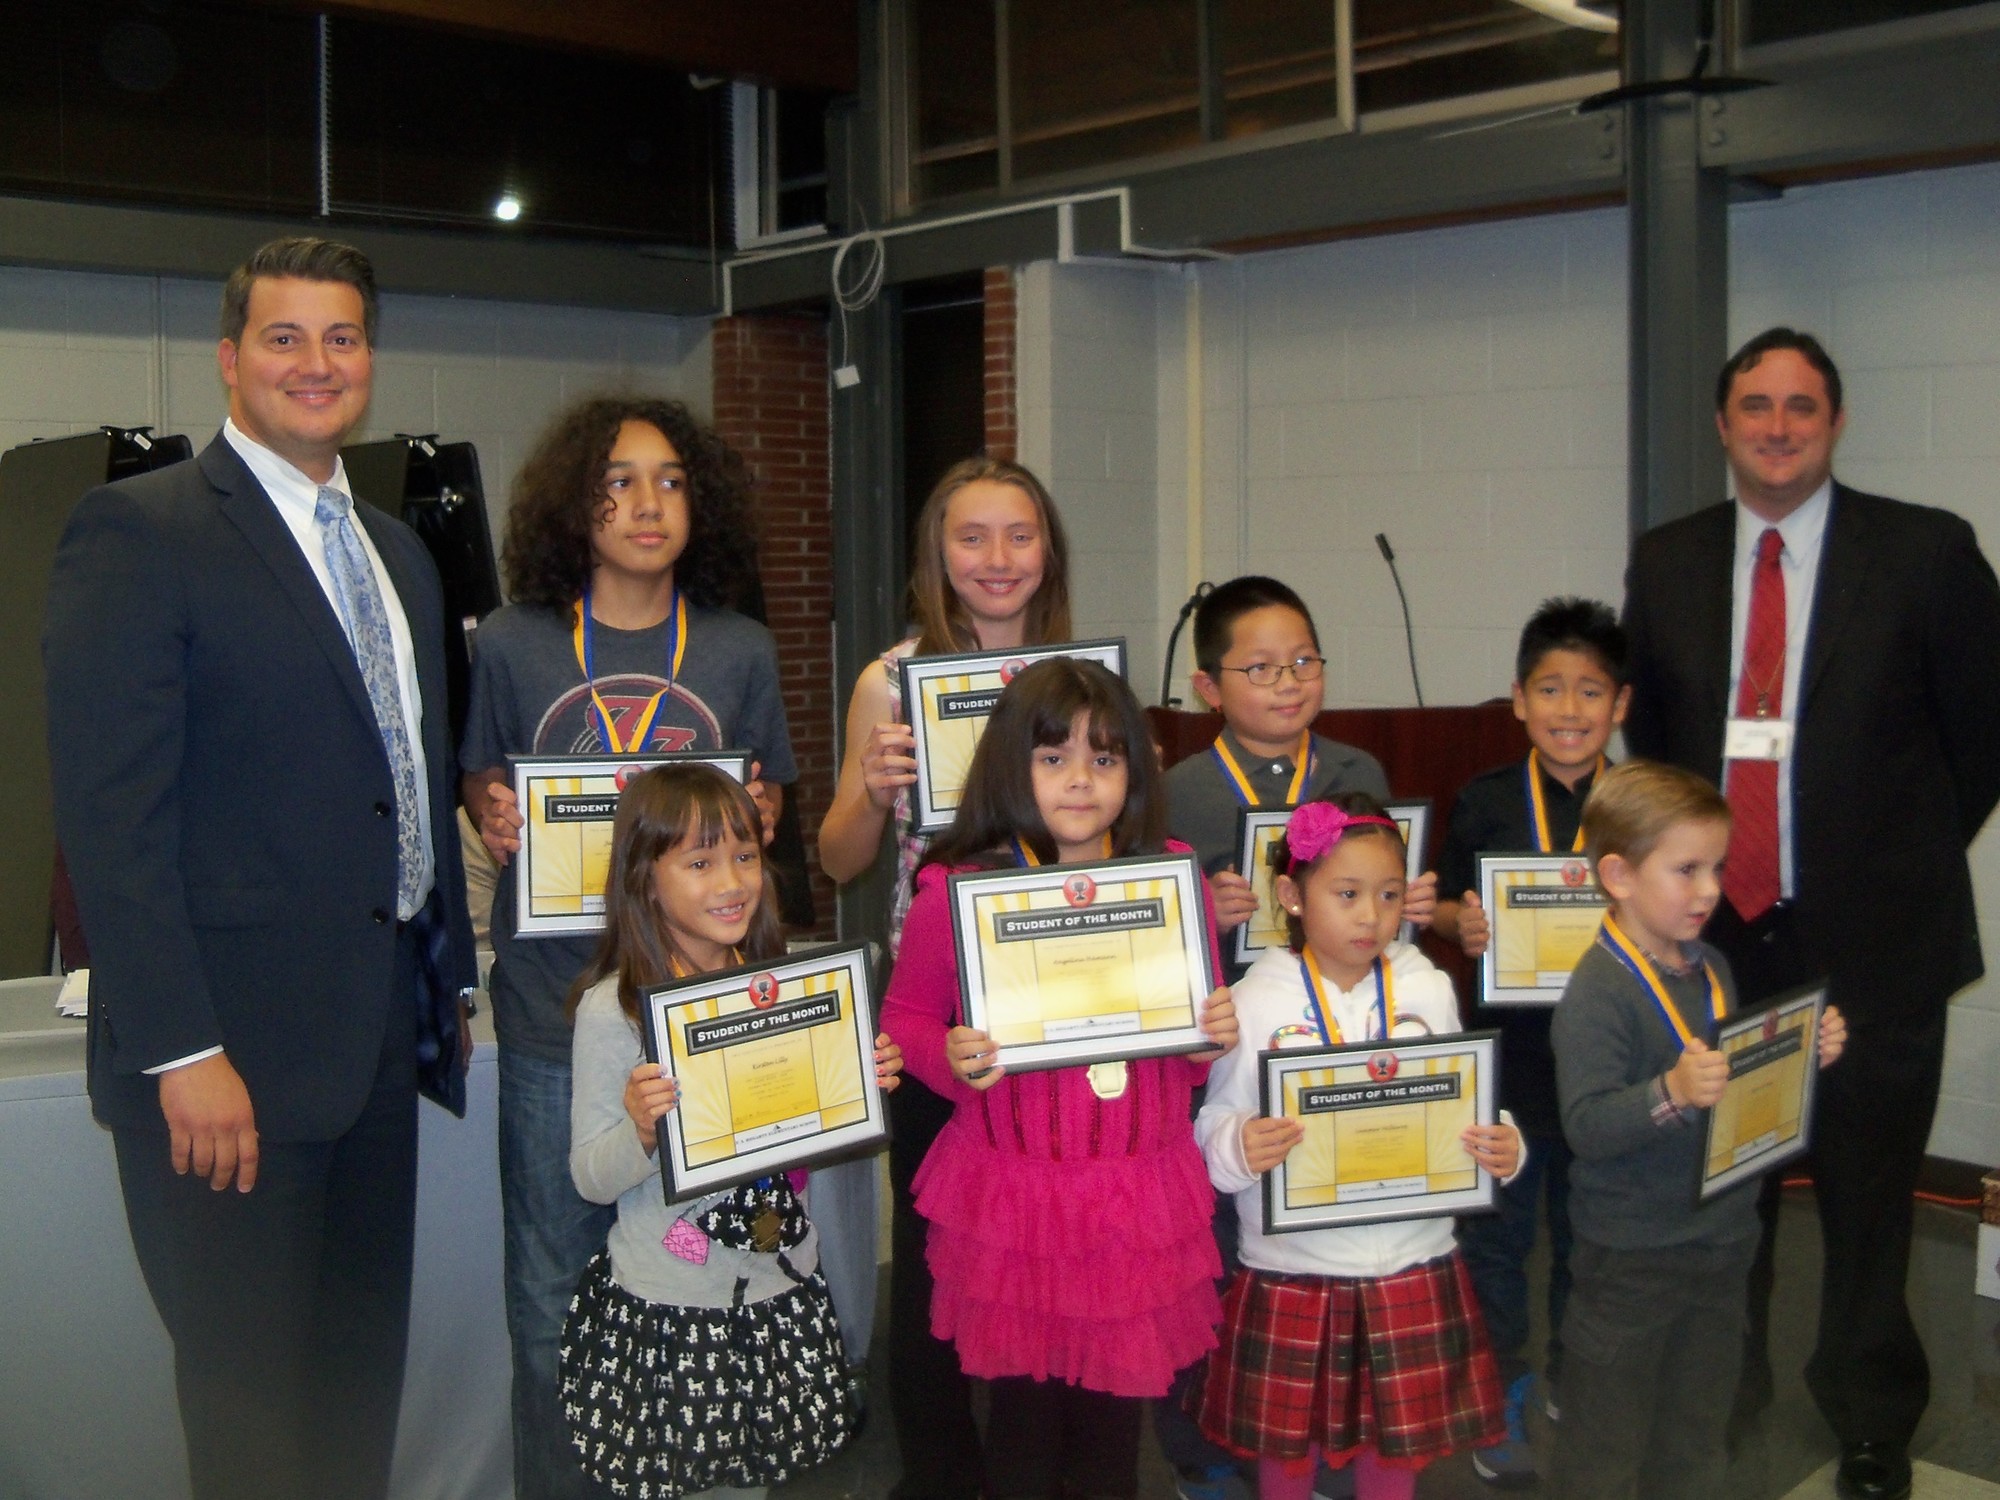 September Student of the Month award winners with their school principals, front row from left: Kirsten Lilly, Angelina Hamann, Summer Millares and Cillian Cantwell. Back row: Lincoln Orens Middle School Principal Vincent Randazzo, Jaylyn Umana, Brooke Yellin, Adam Santa Maria, Gabriel Tejada, and Hegarty School Principal Jacob Russum.